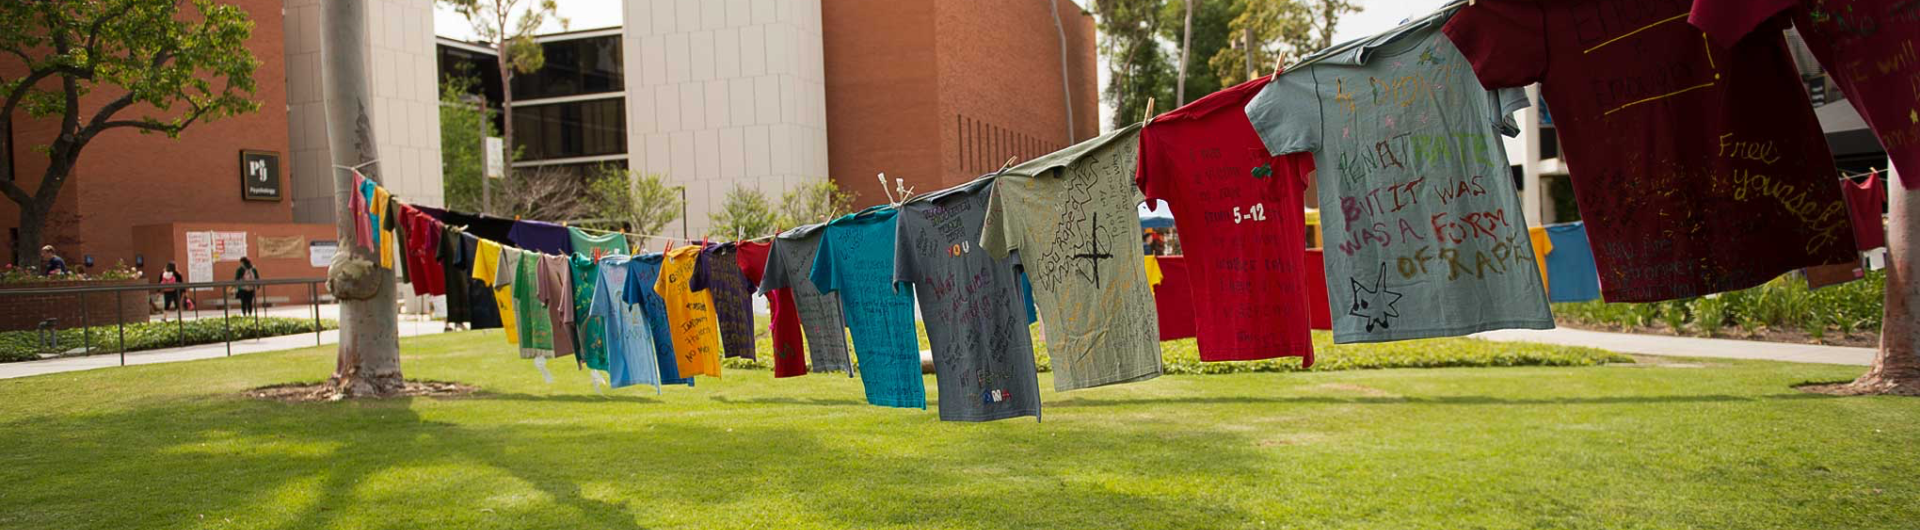 image of shirts hung on a clothesline with personal messages on them